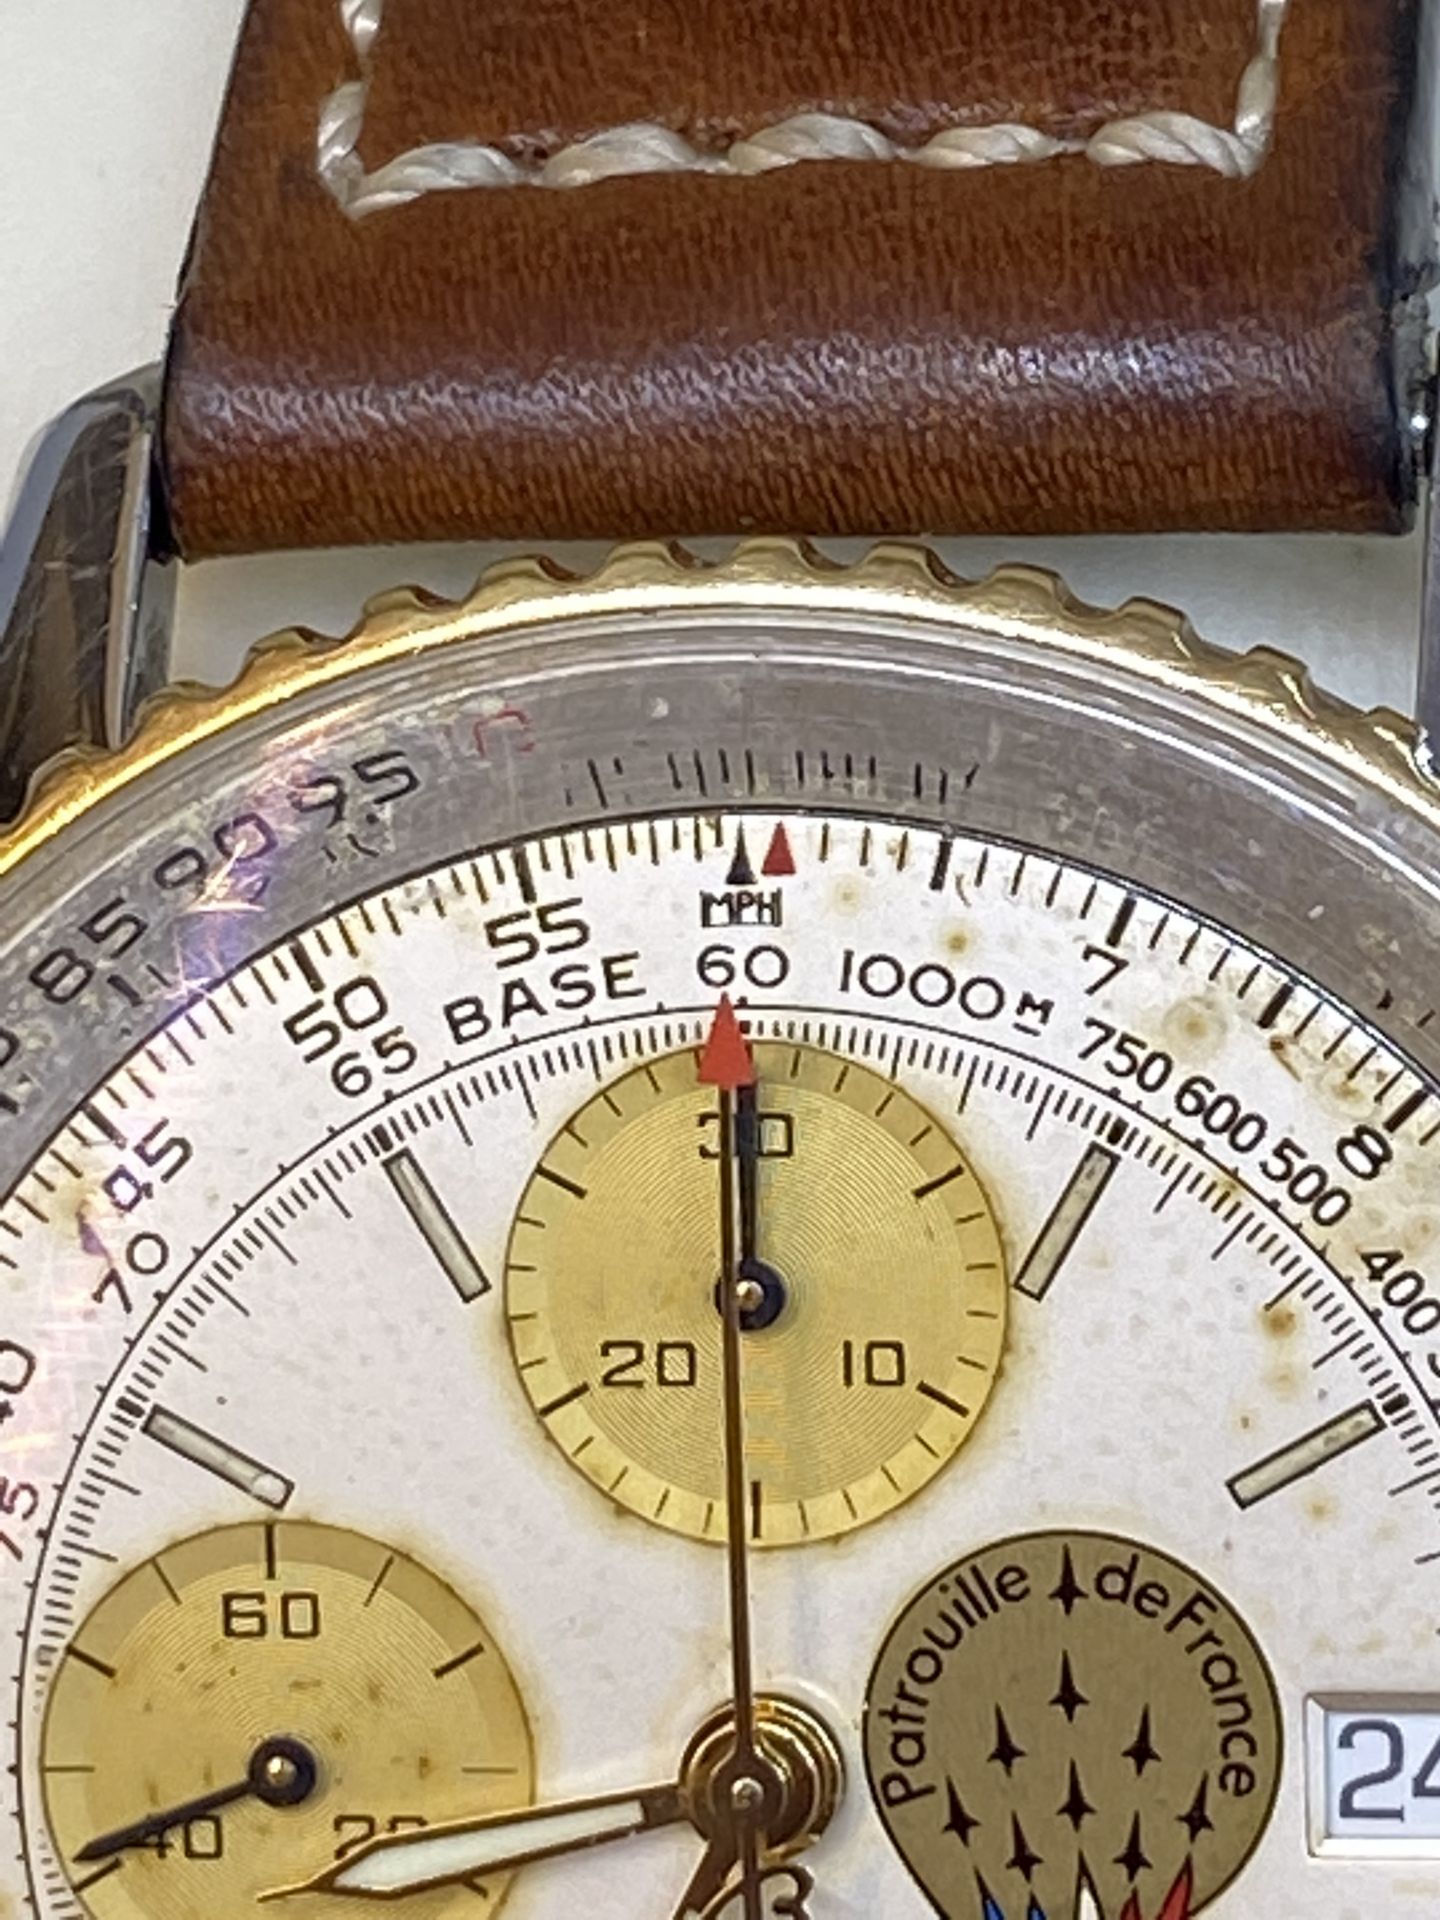 Breitling Navitimer Chronograph Watch with Box - Image 7 of 14